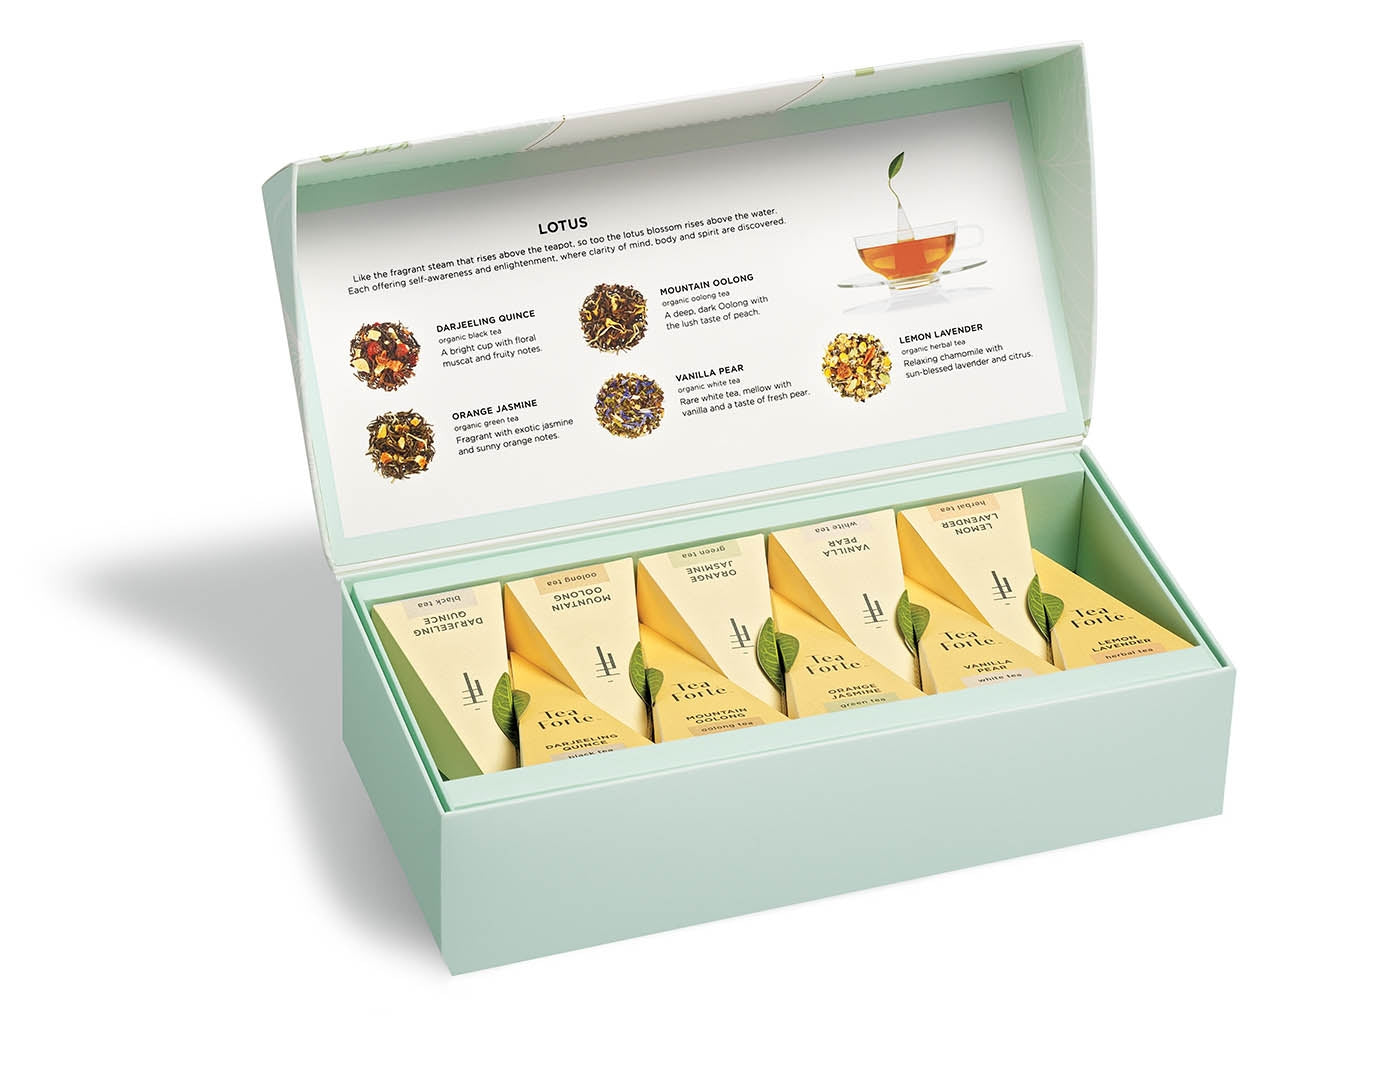 Lotus tea assortment in a 10 count petite presentation box with lid open